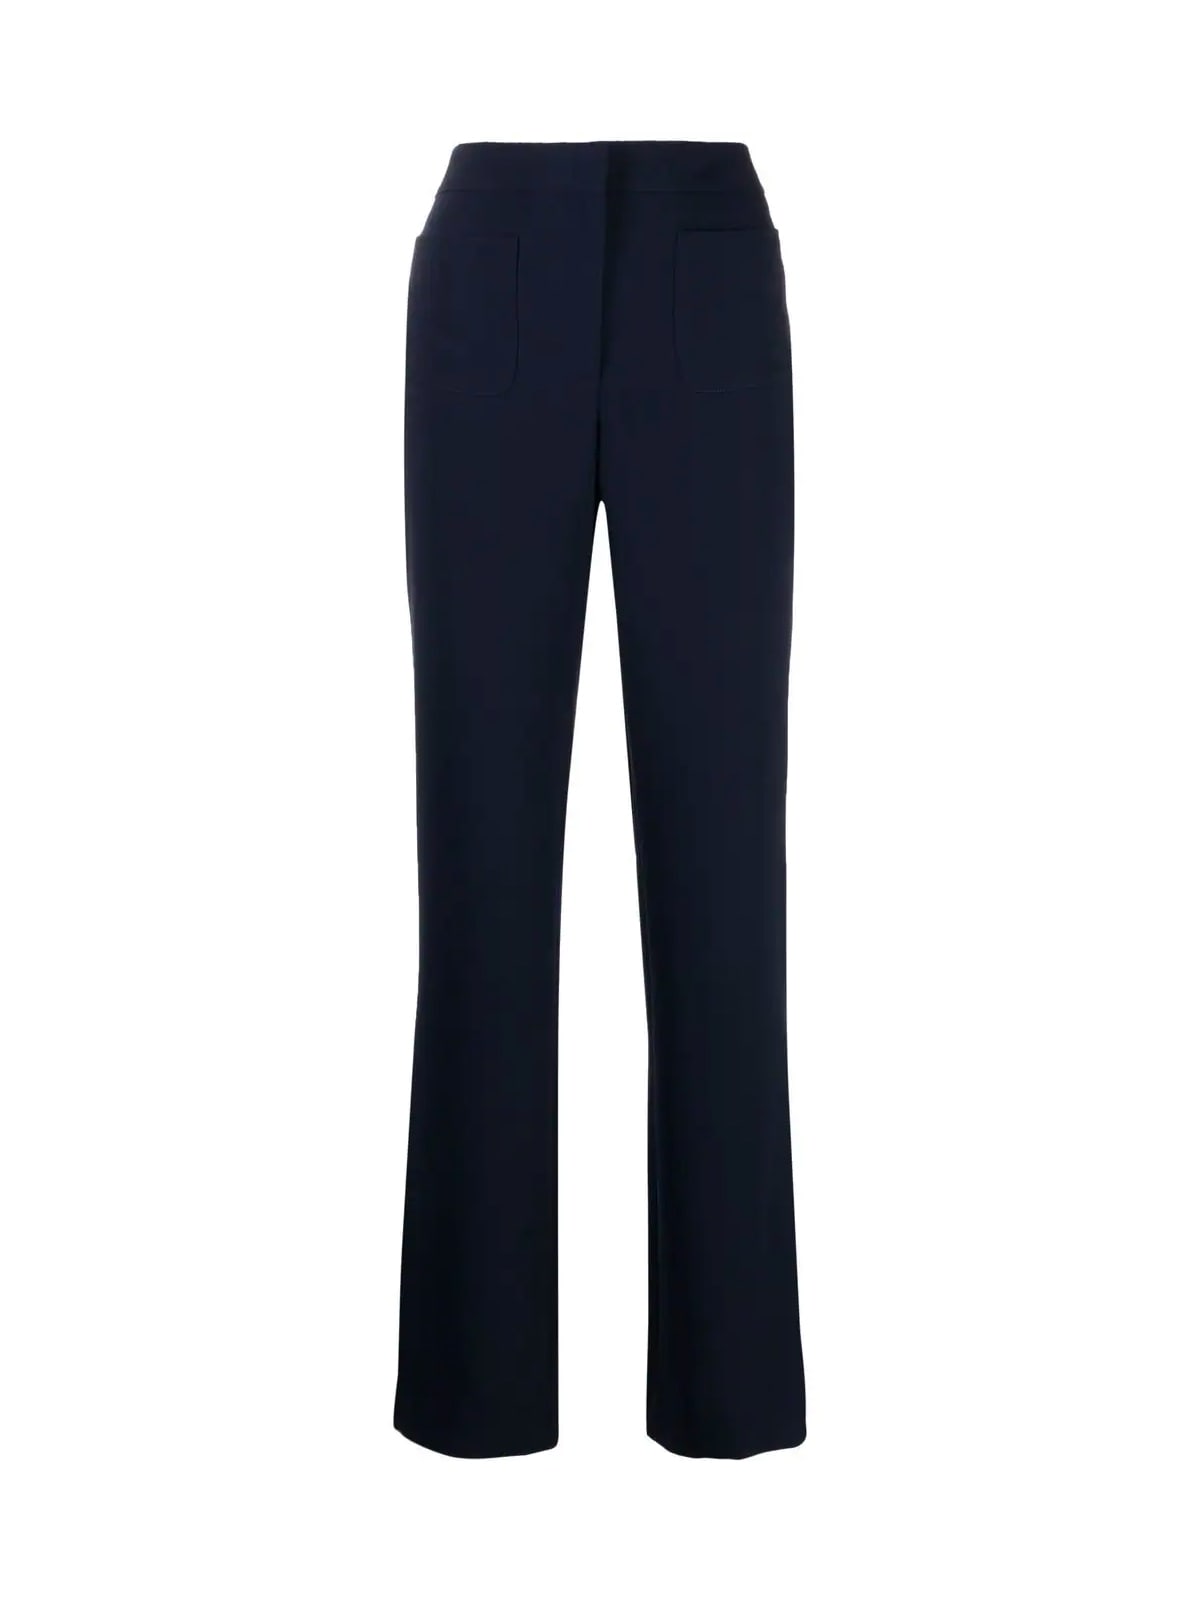 See by Chloé High Waisted Wide Leg Pants